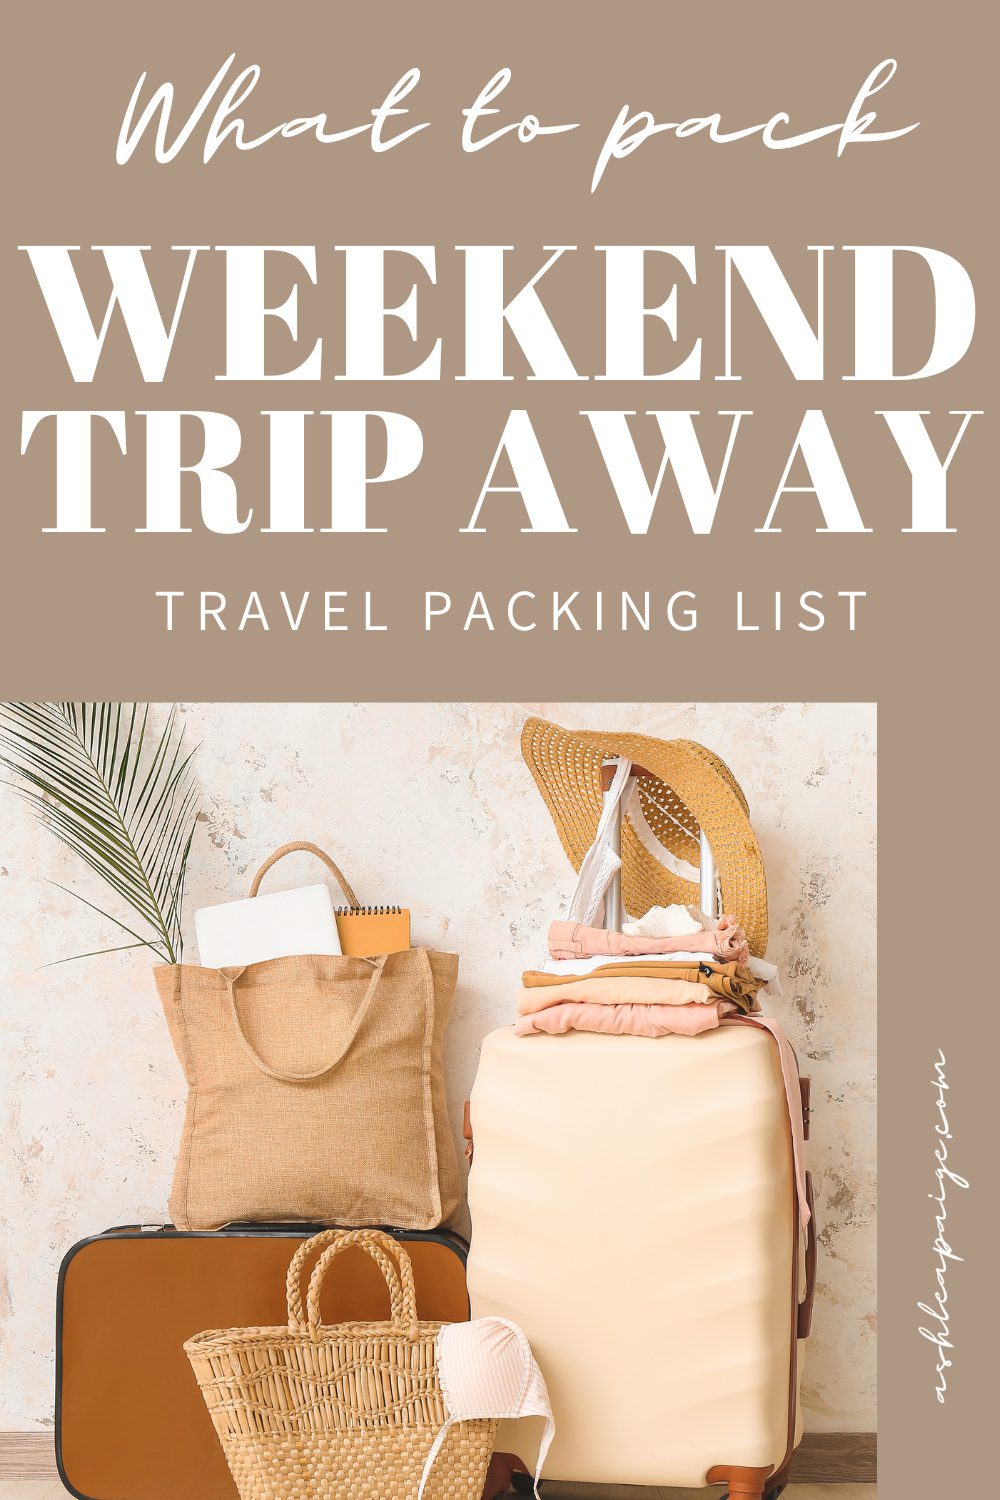 What To Pack For An Overnight Getaway - With Checklist